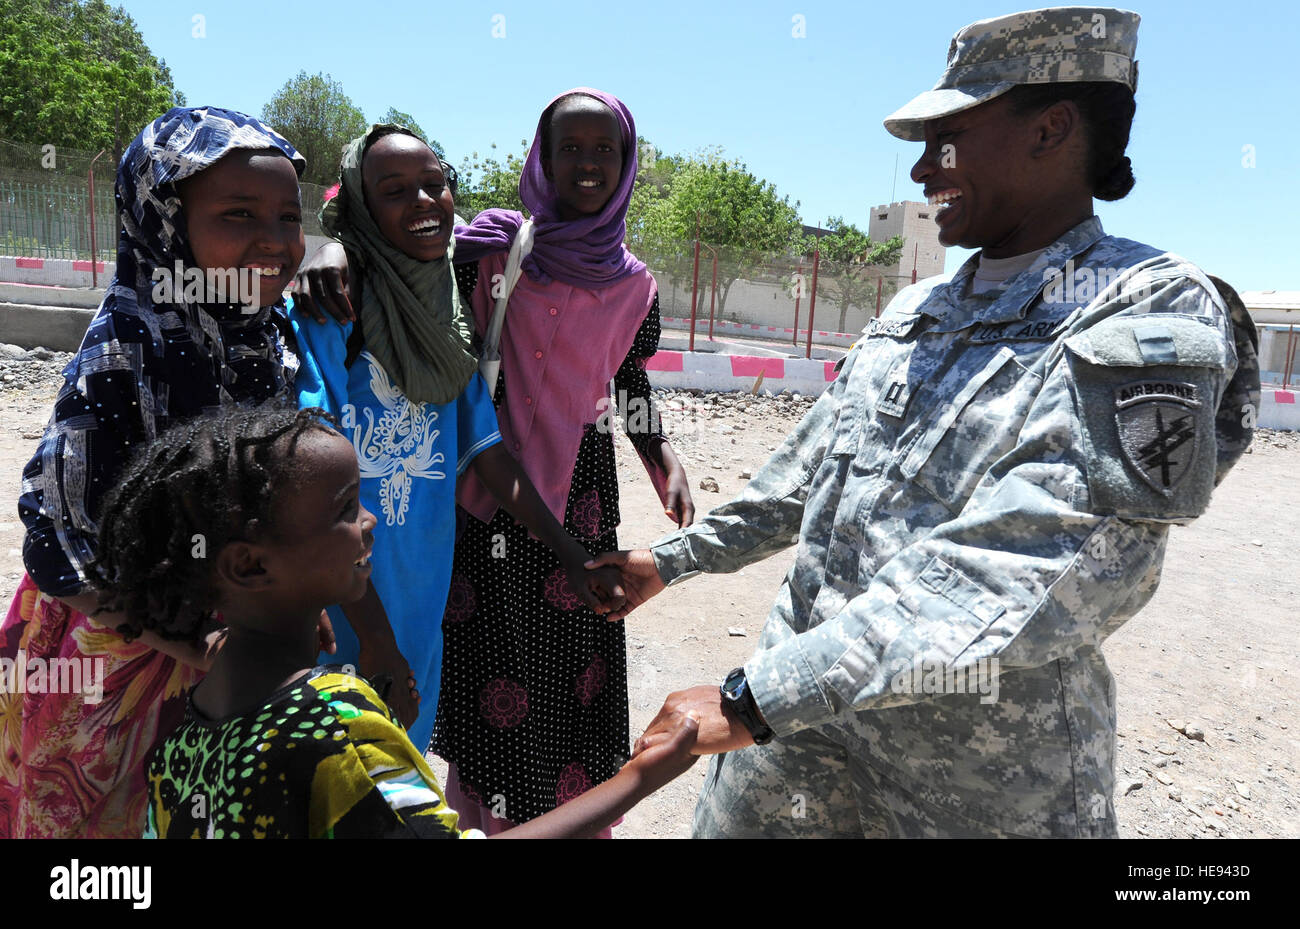 110419-F-XM360-102 DIKHIL, Djibouti (April 19, 2011) - U.S. Army Captain Courtney Sanders, 402nd Civil Affairs Battalion, shares a laugh with a group of girls in front of the Dikhil High School April 19, after finishing the dayÕs work on the teamÕs latest project: renovating the school. This project began April 16 and is scheduled to consist of refurbishing six classrooms, the schoolÕs roof and an office.    Master Sgt. Dawn Price) Stock Photo